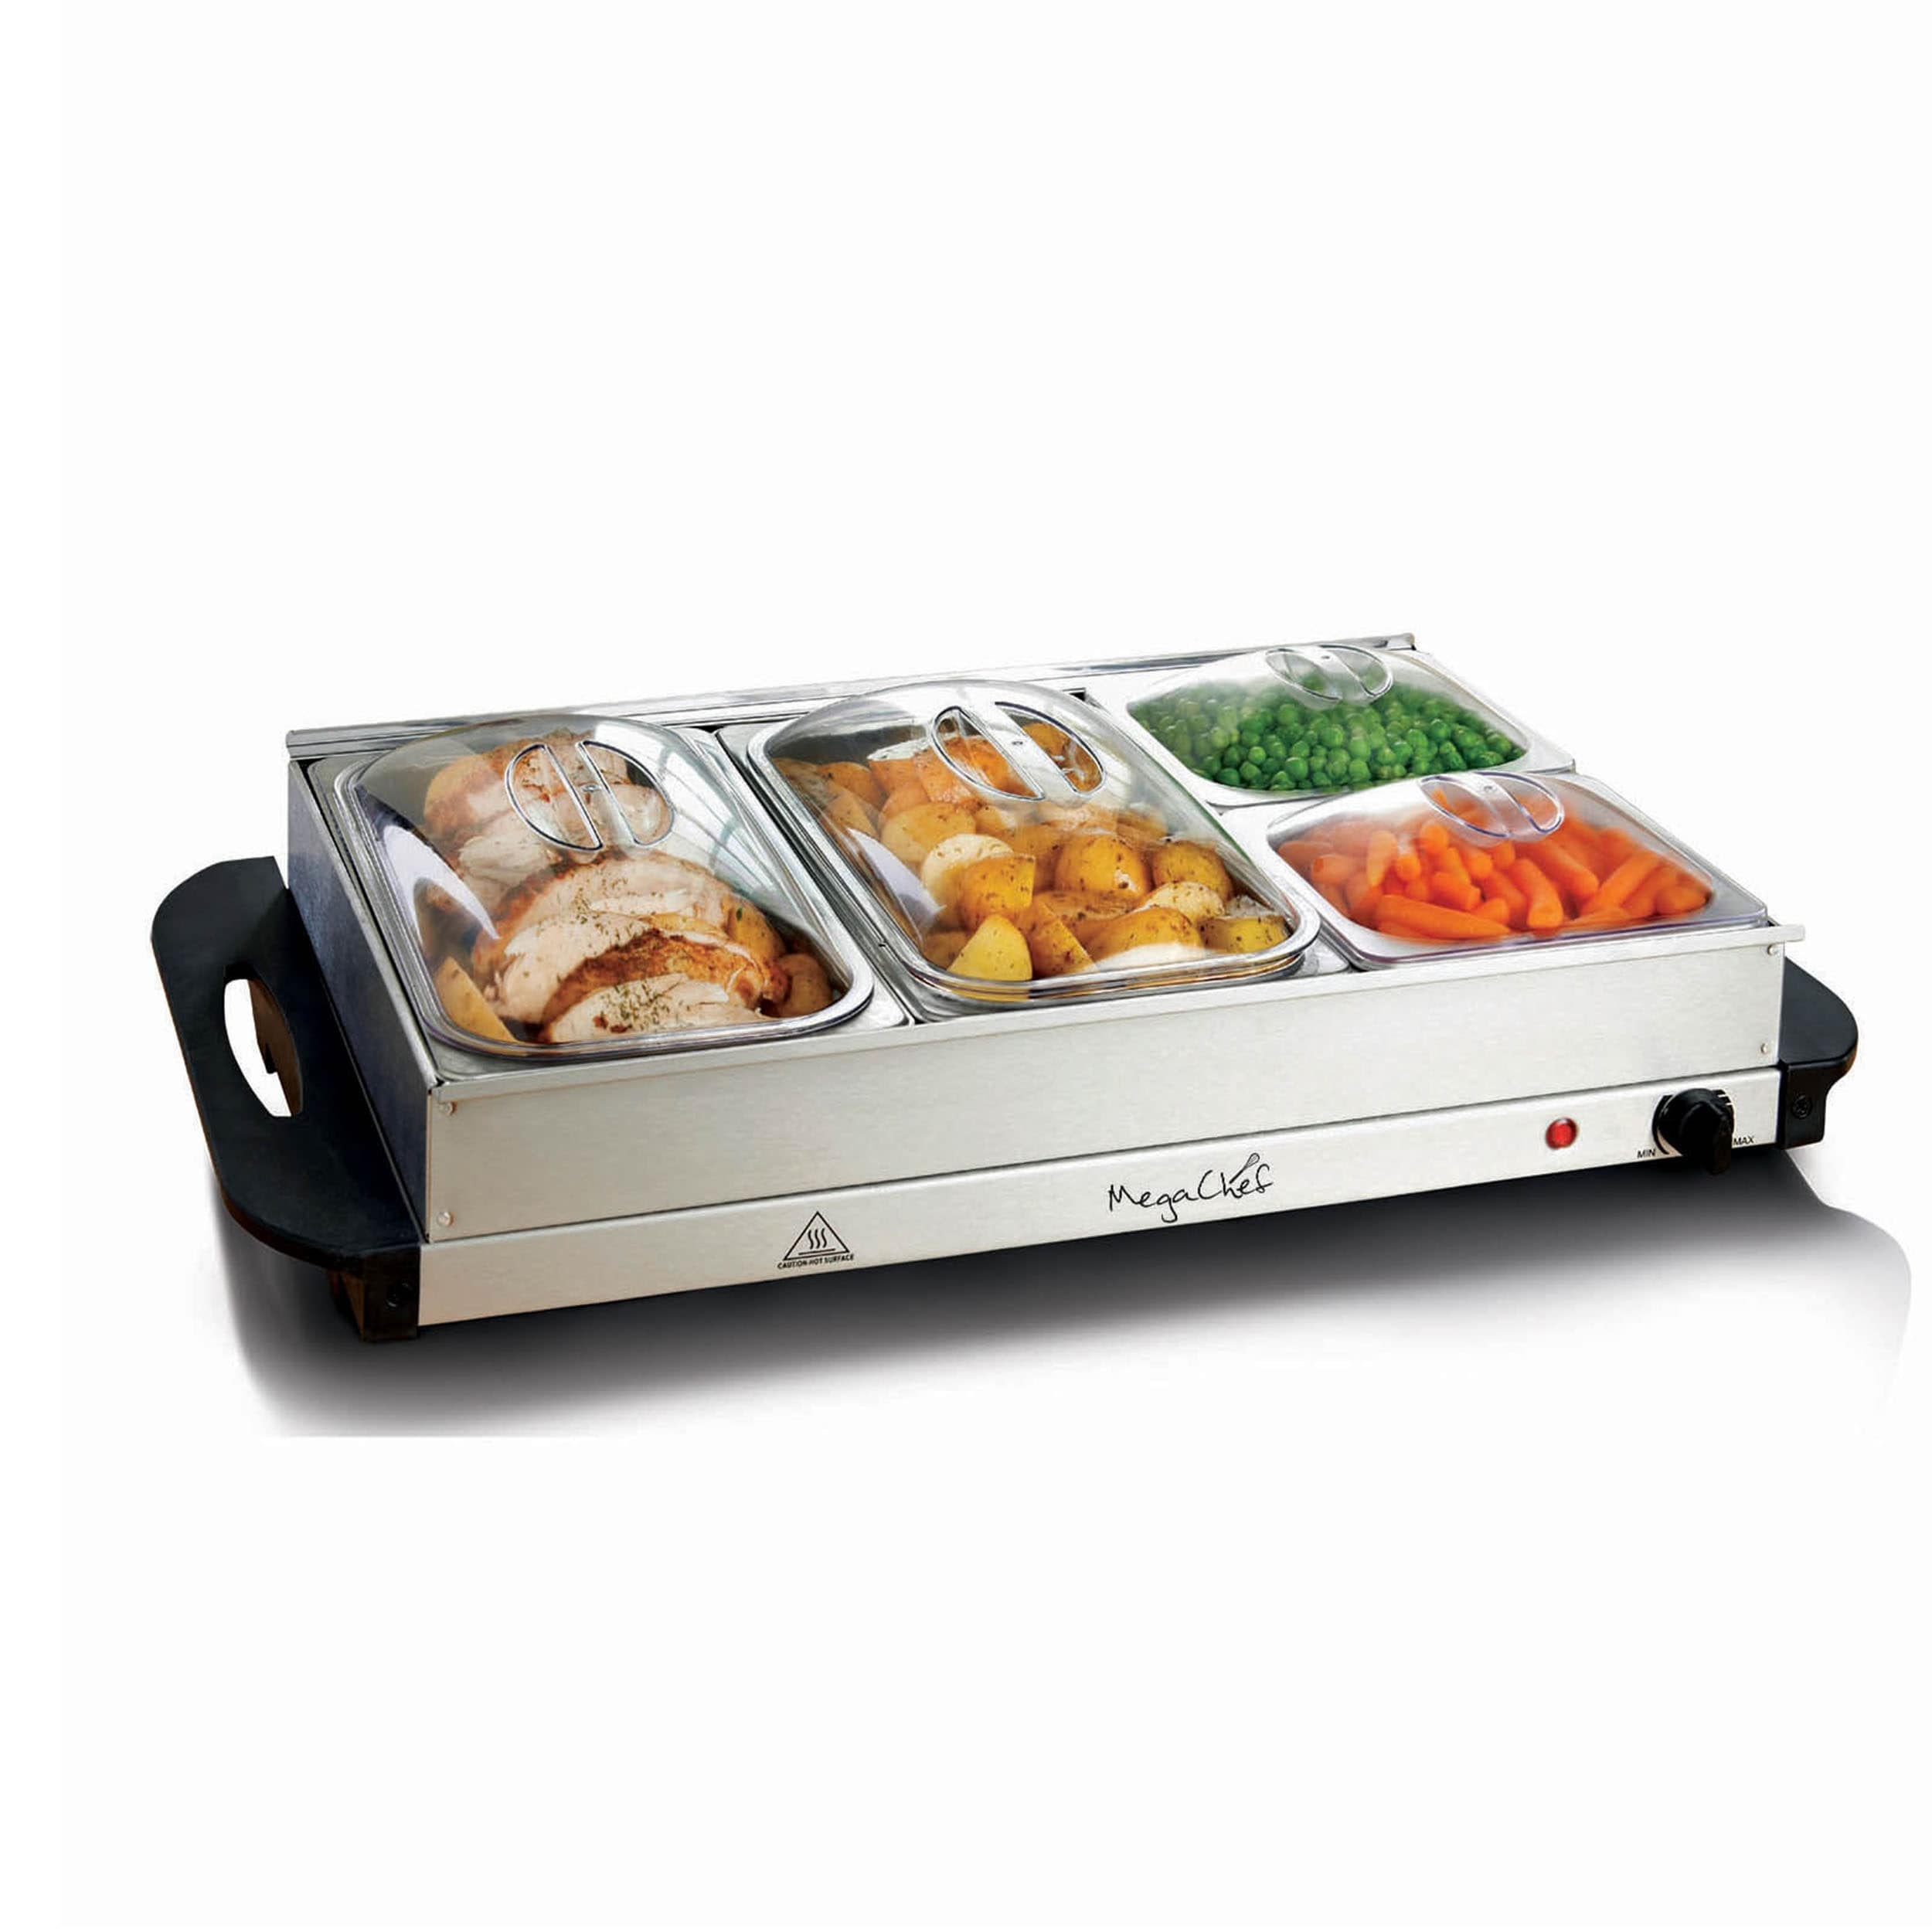 MegaChef Buffet Server & Food Warmer Tray Holder with Four Sections